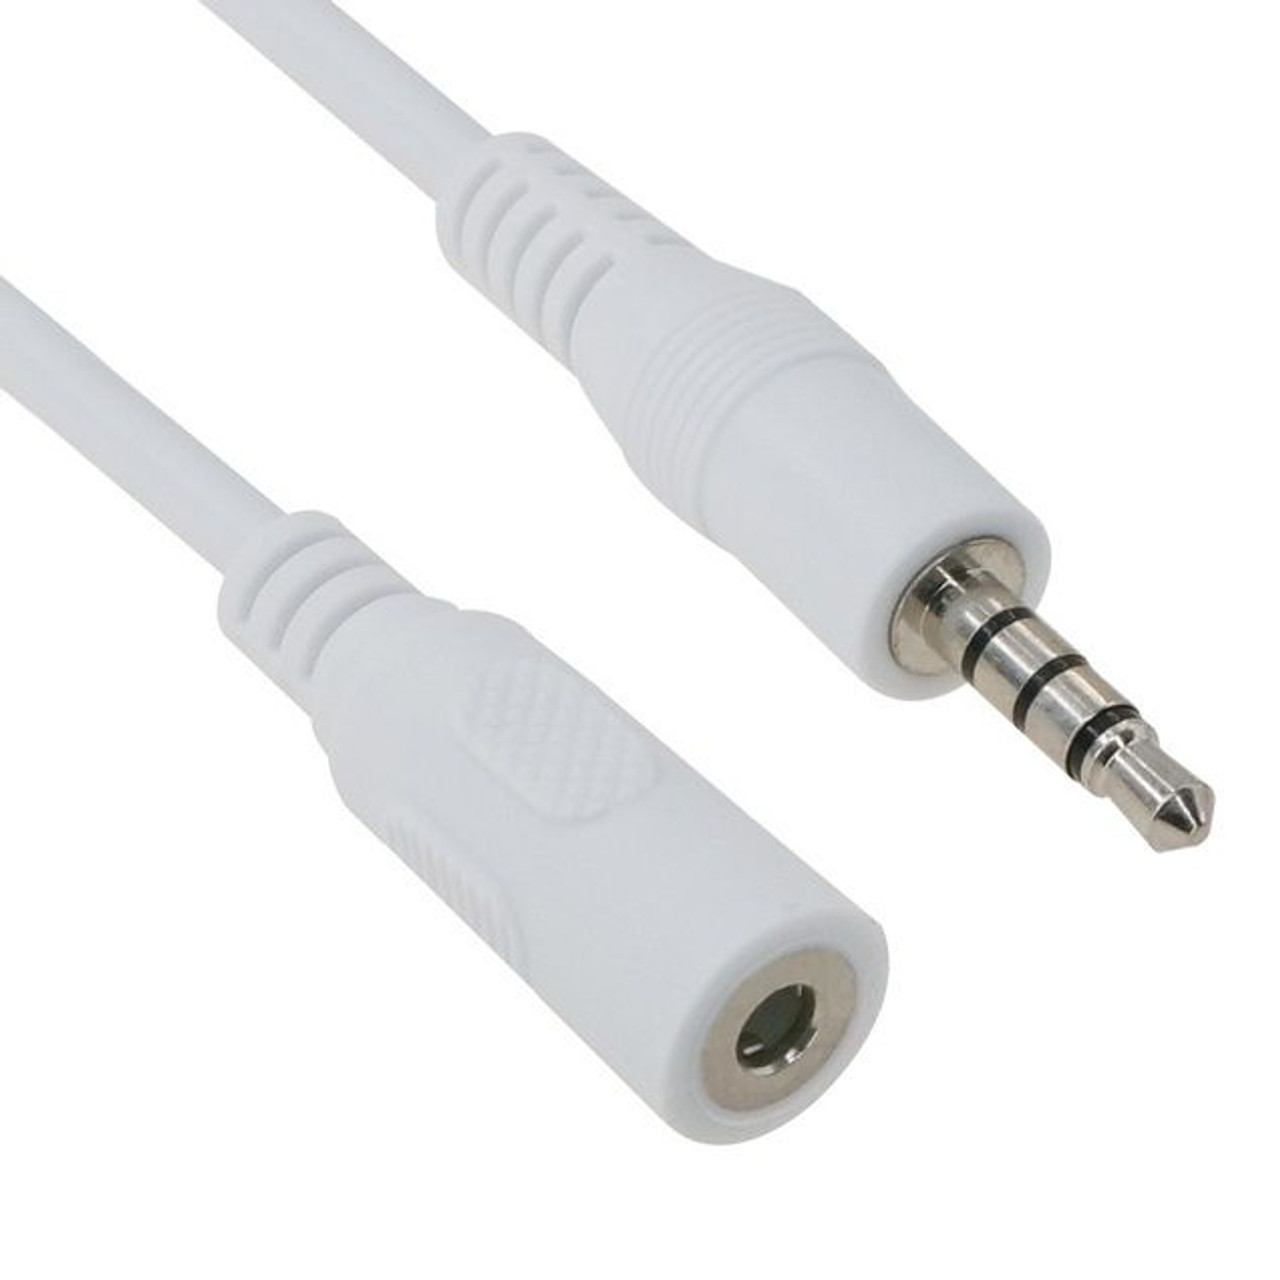 Basics Male to Female Stereo Audio Cable (Aux Extension Cable) with  Gold Plated Connectors- 6 Feet (3.5mm) - Does not support mic